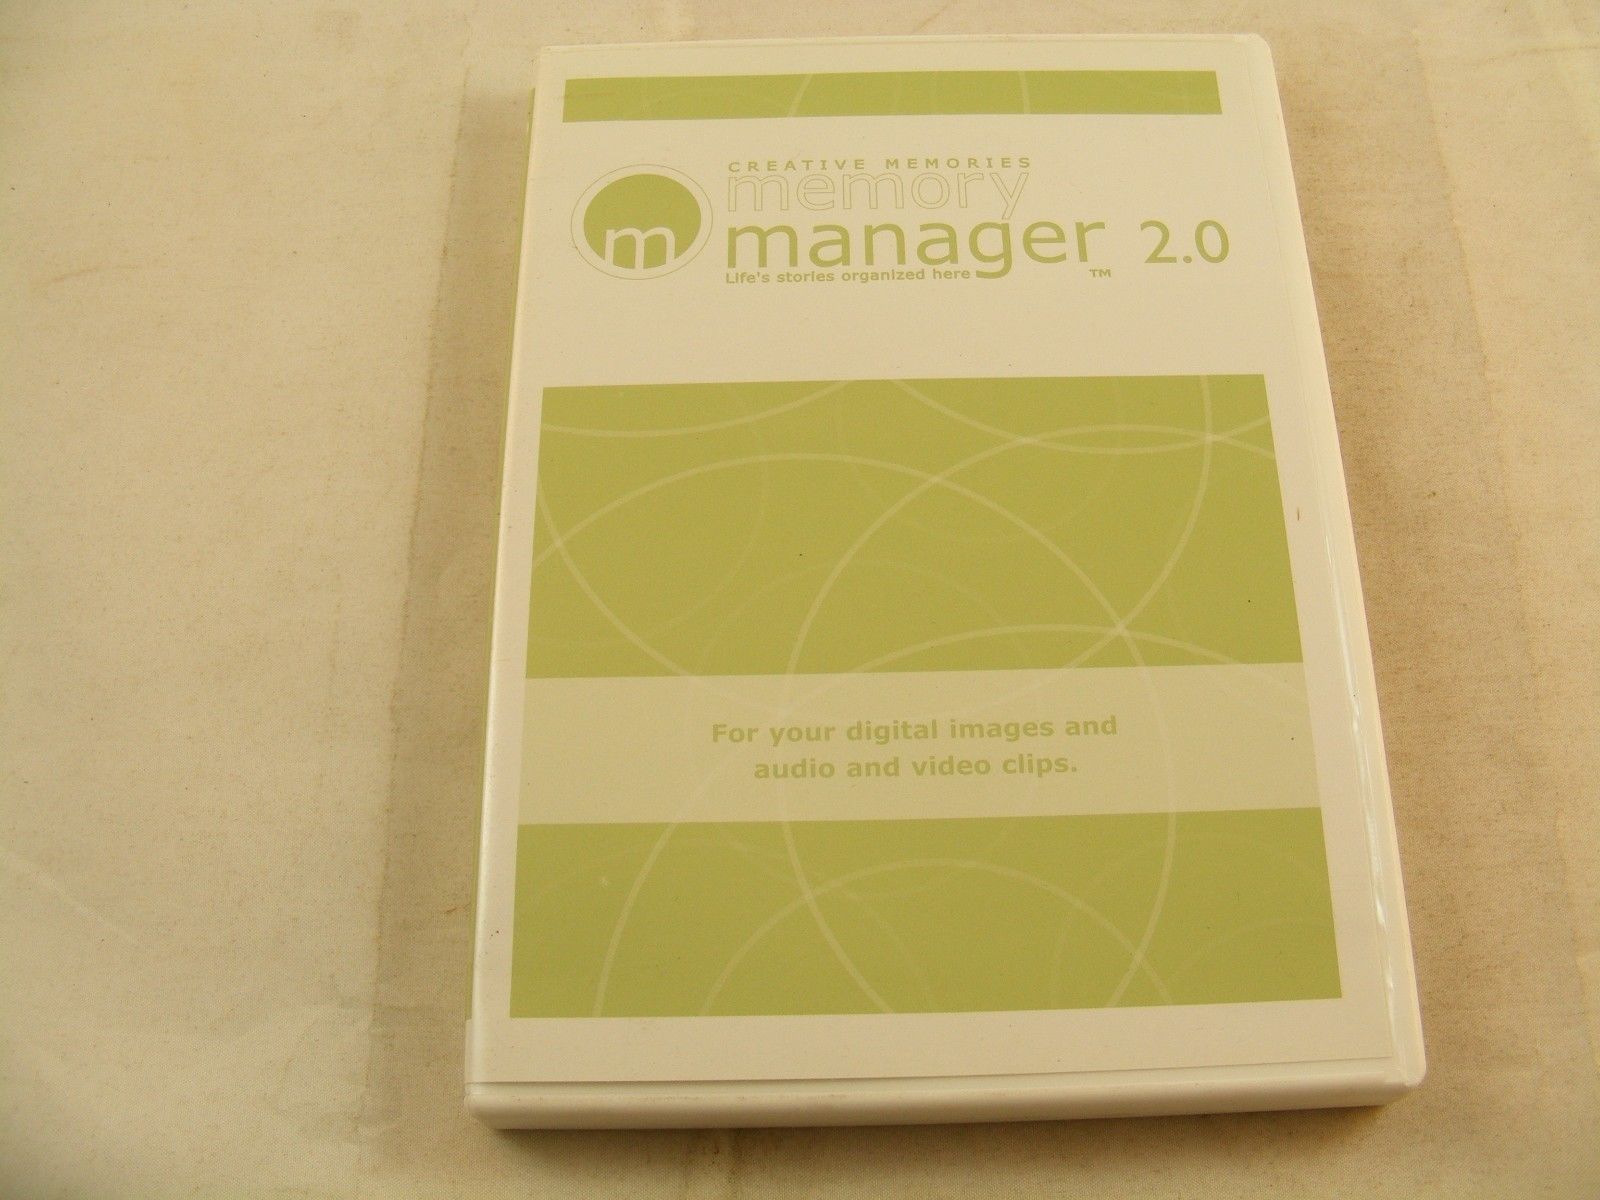 CREATIVE MEMORIES memory manager 2.0 software CD - Excellent Condition ! - £1.49 GBP